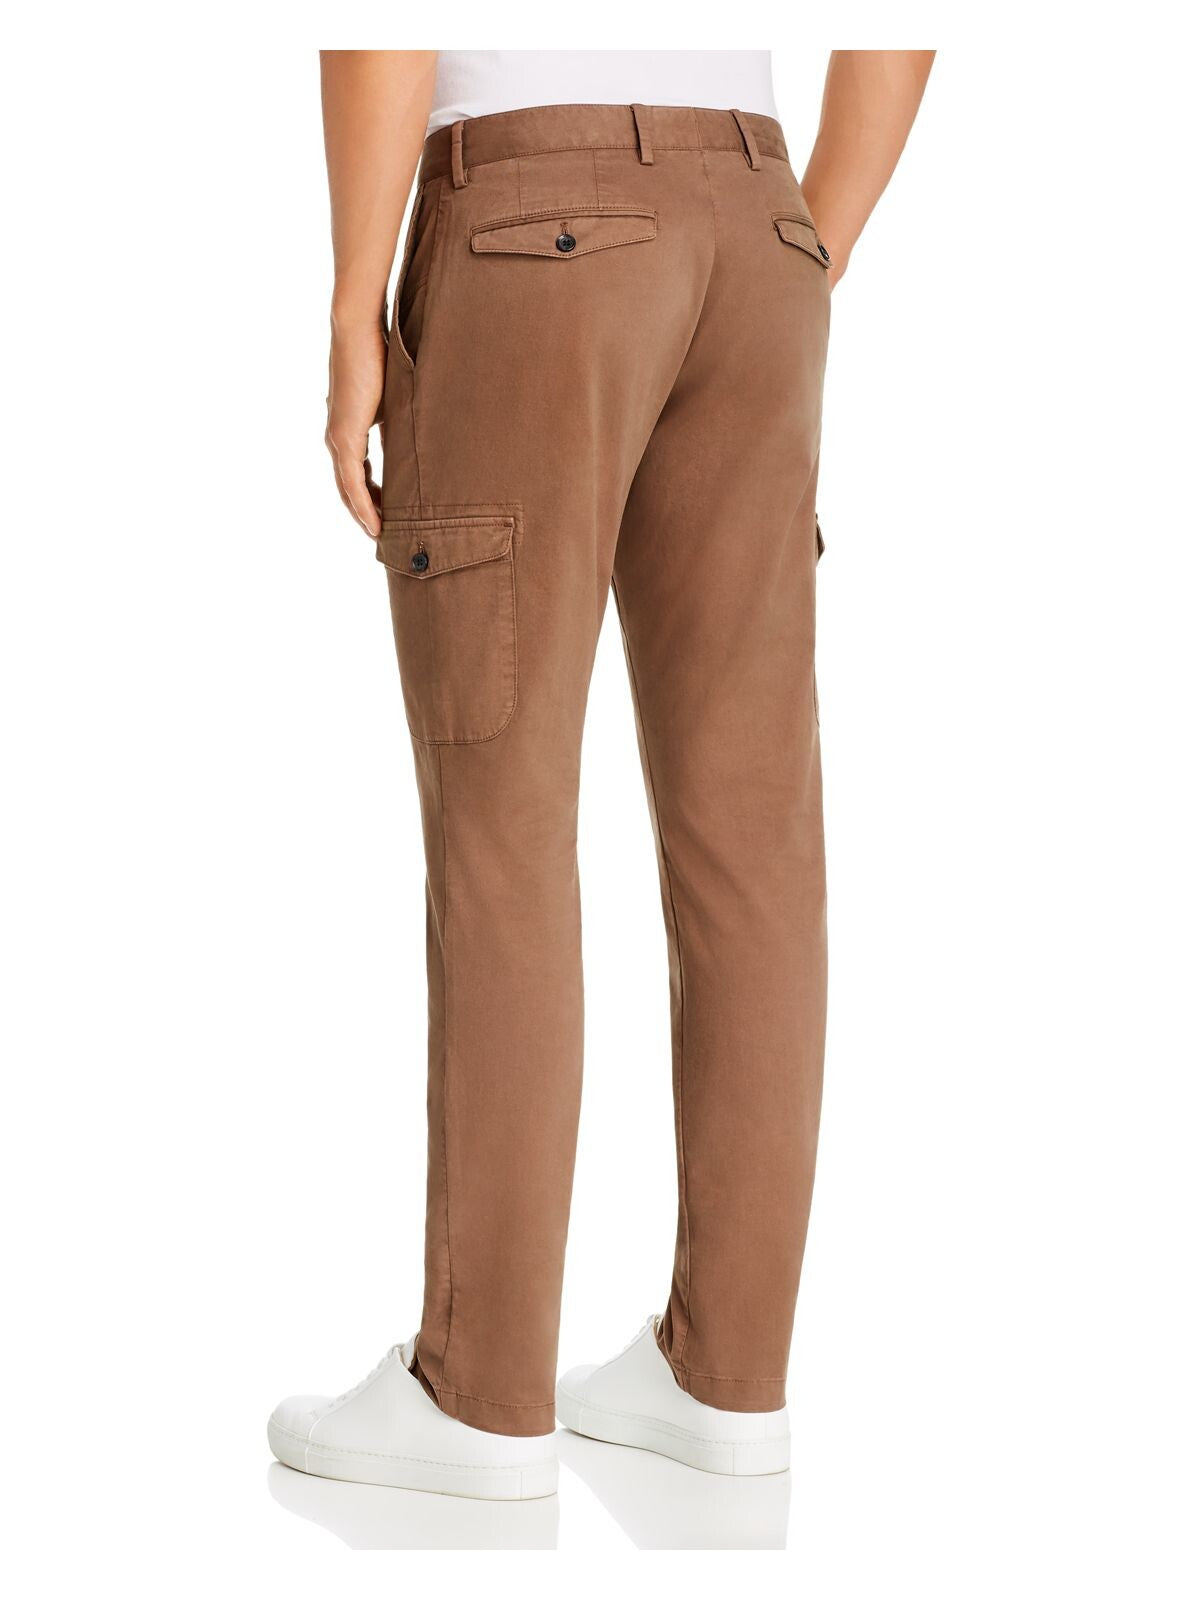 DYLAN GRAY Mens Brown Classic Fit Cargo Pants 34